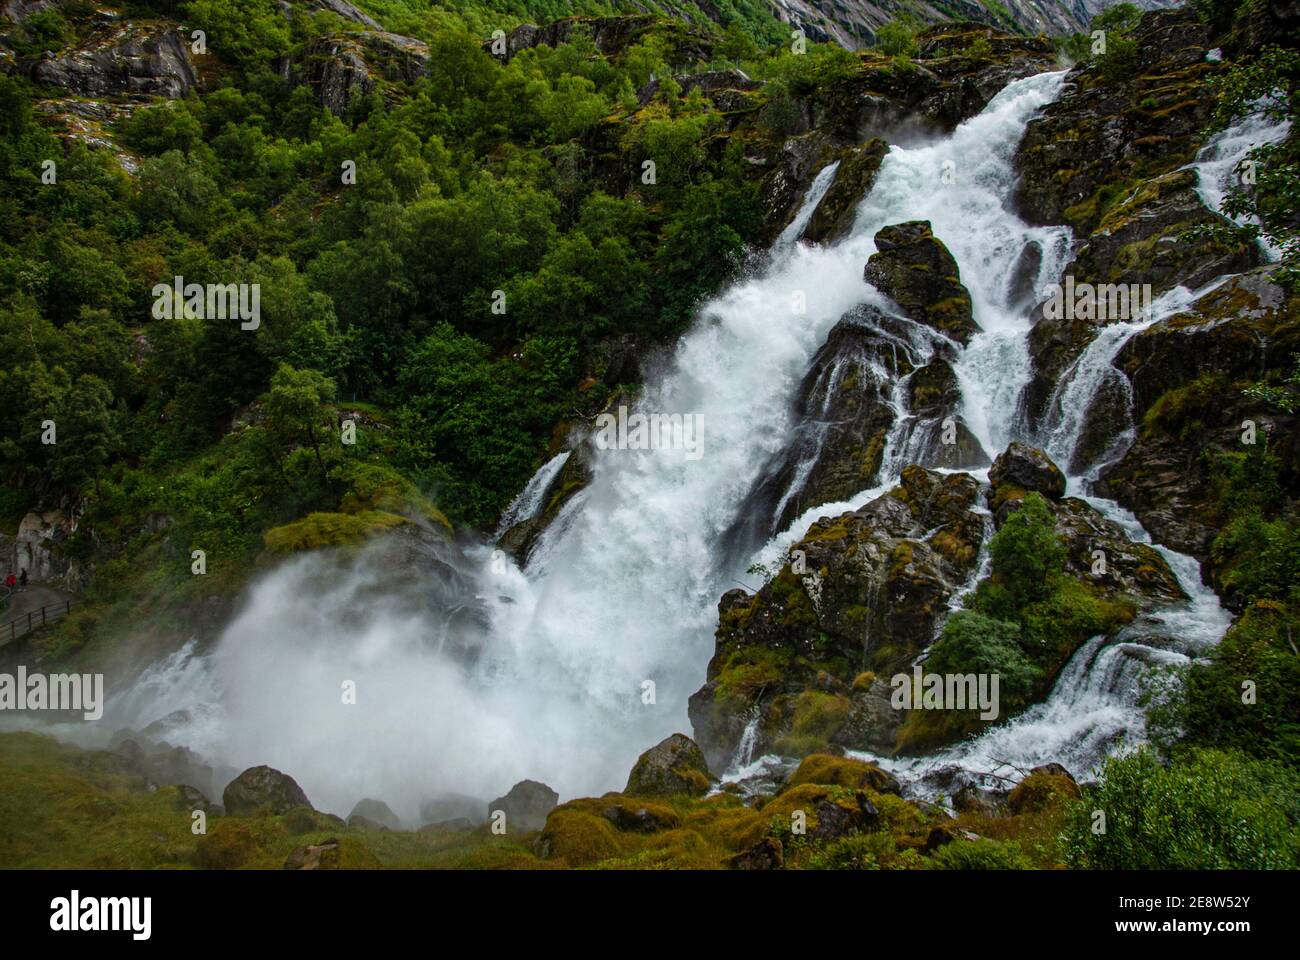 Kleivafossen waterfall, Briksdalselva river, Norway.  The river is fed by the melting Briksdal Glacier (Briksdalsbreen). Stock Photo